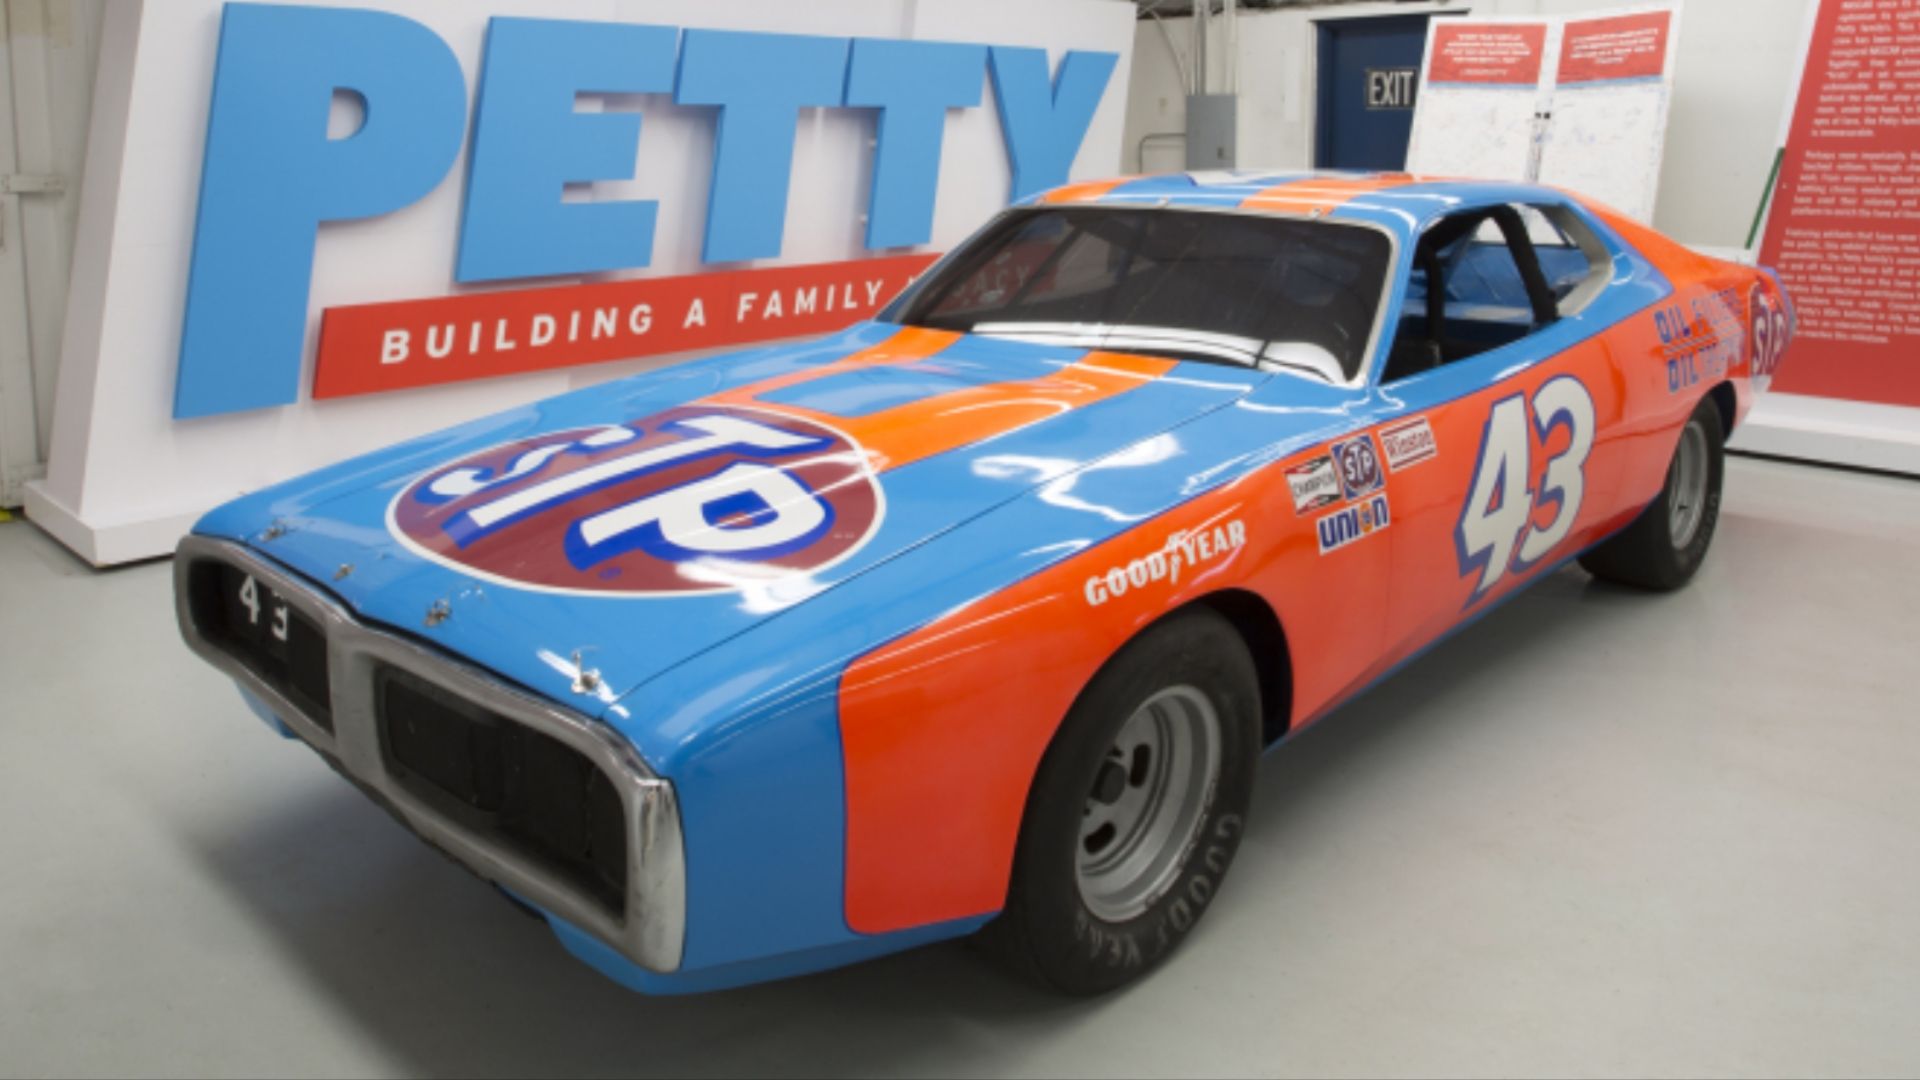 Richard Petty Dodge Charger 1974 Front Quarter View